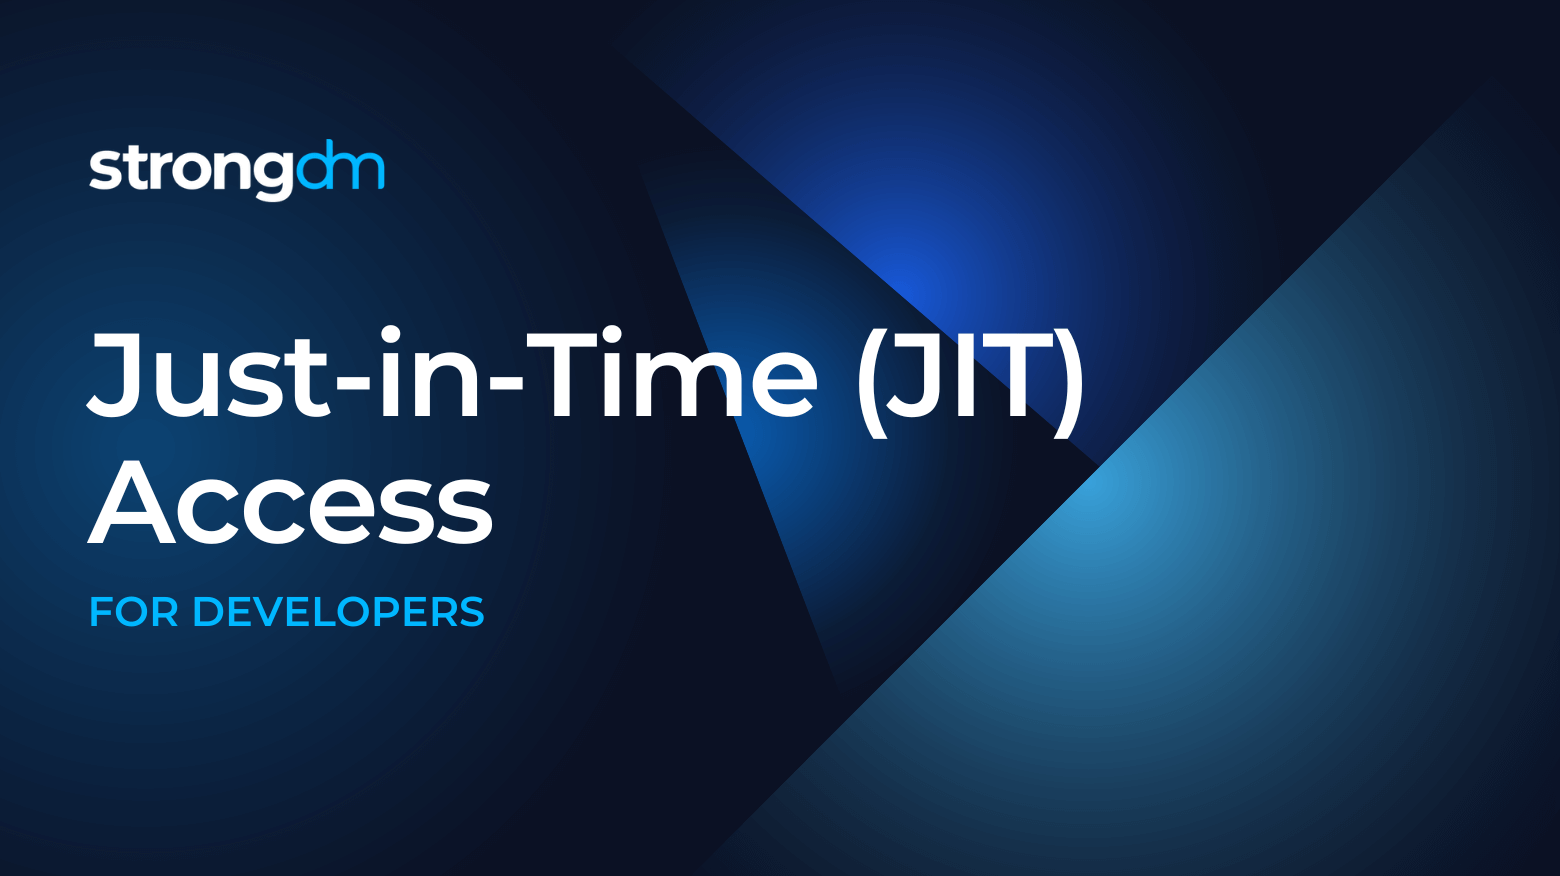 A Practical Approach to Just-in-Time (JIT) Access for Developers